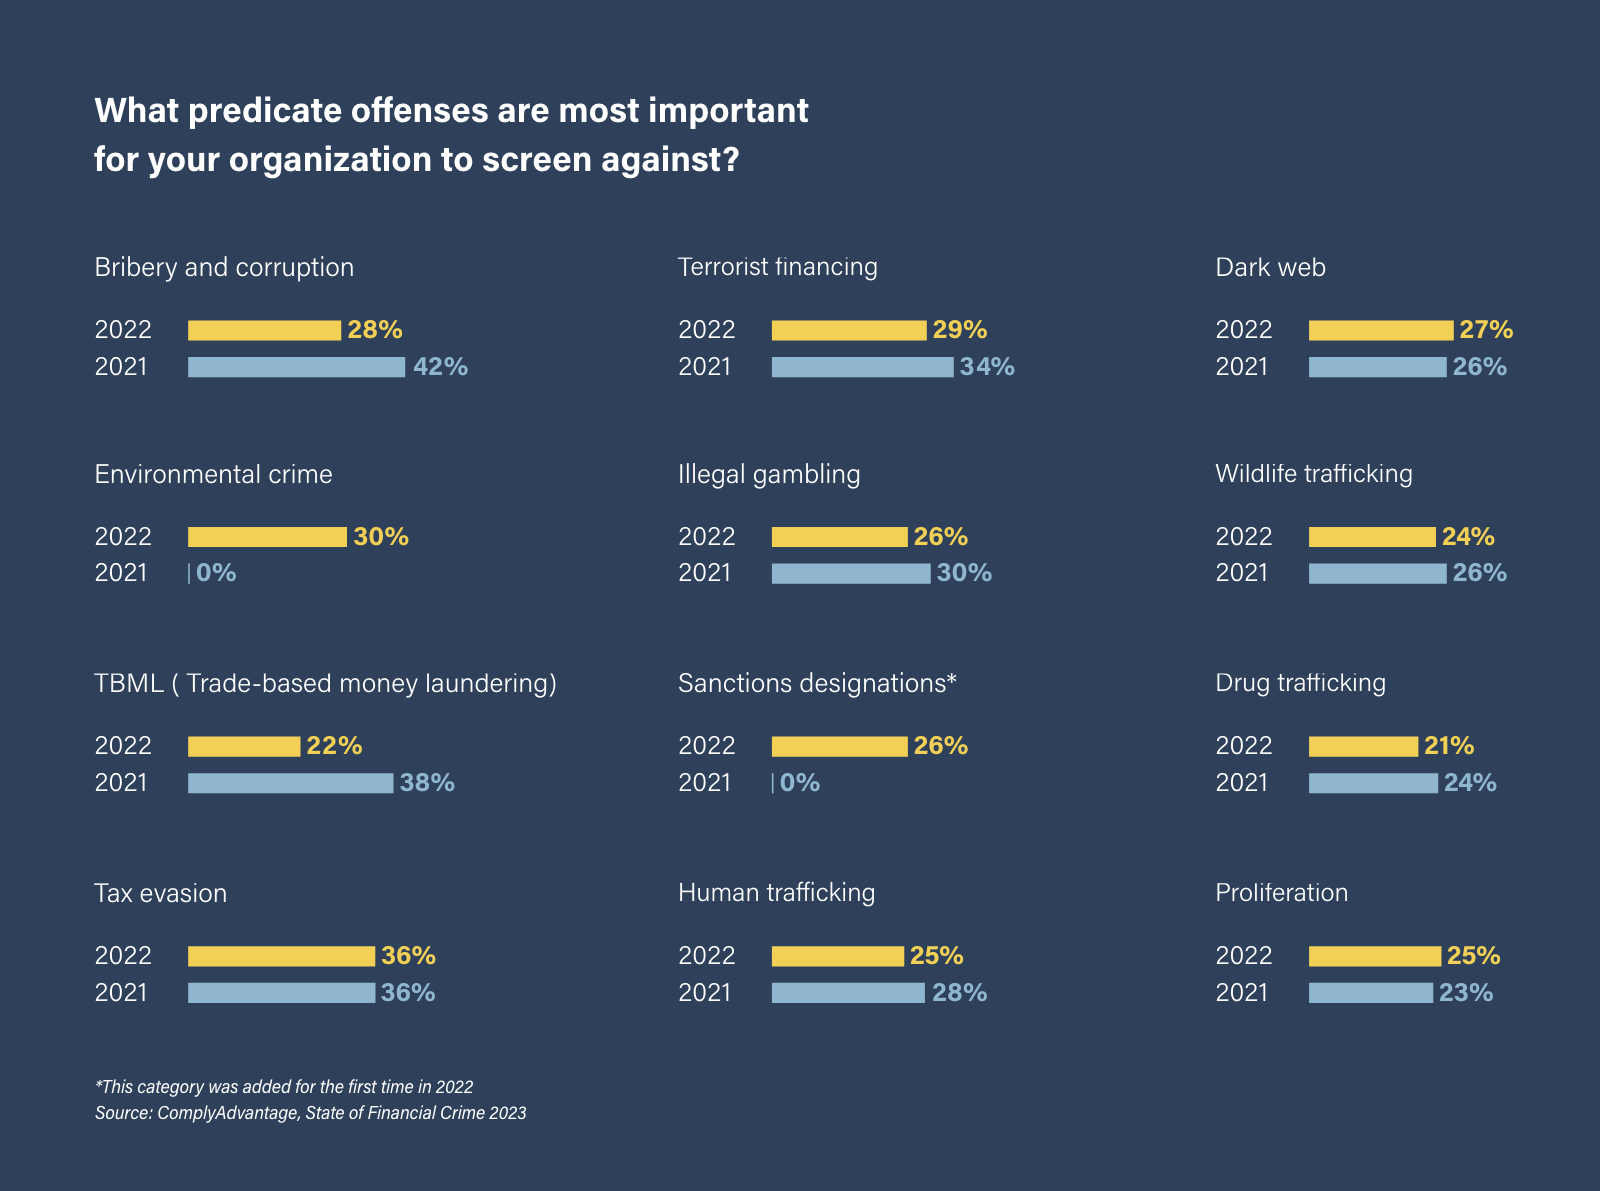 Survey results: What predicate offences are most important for your organization to screen against?